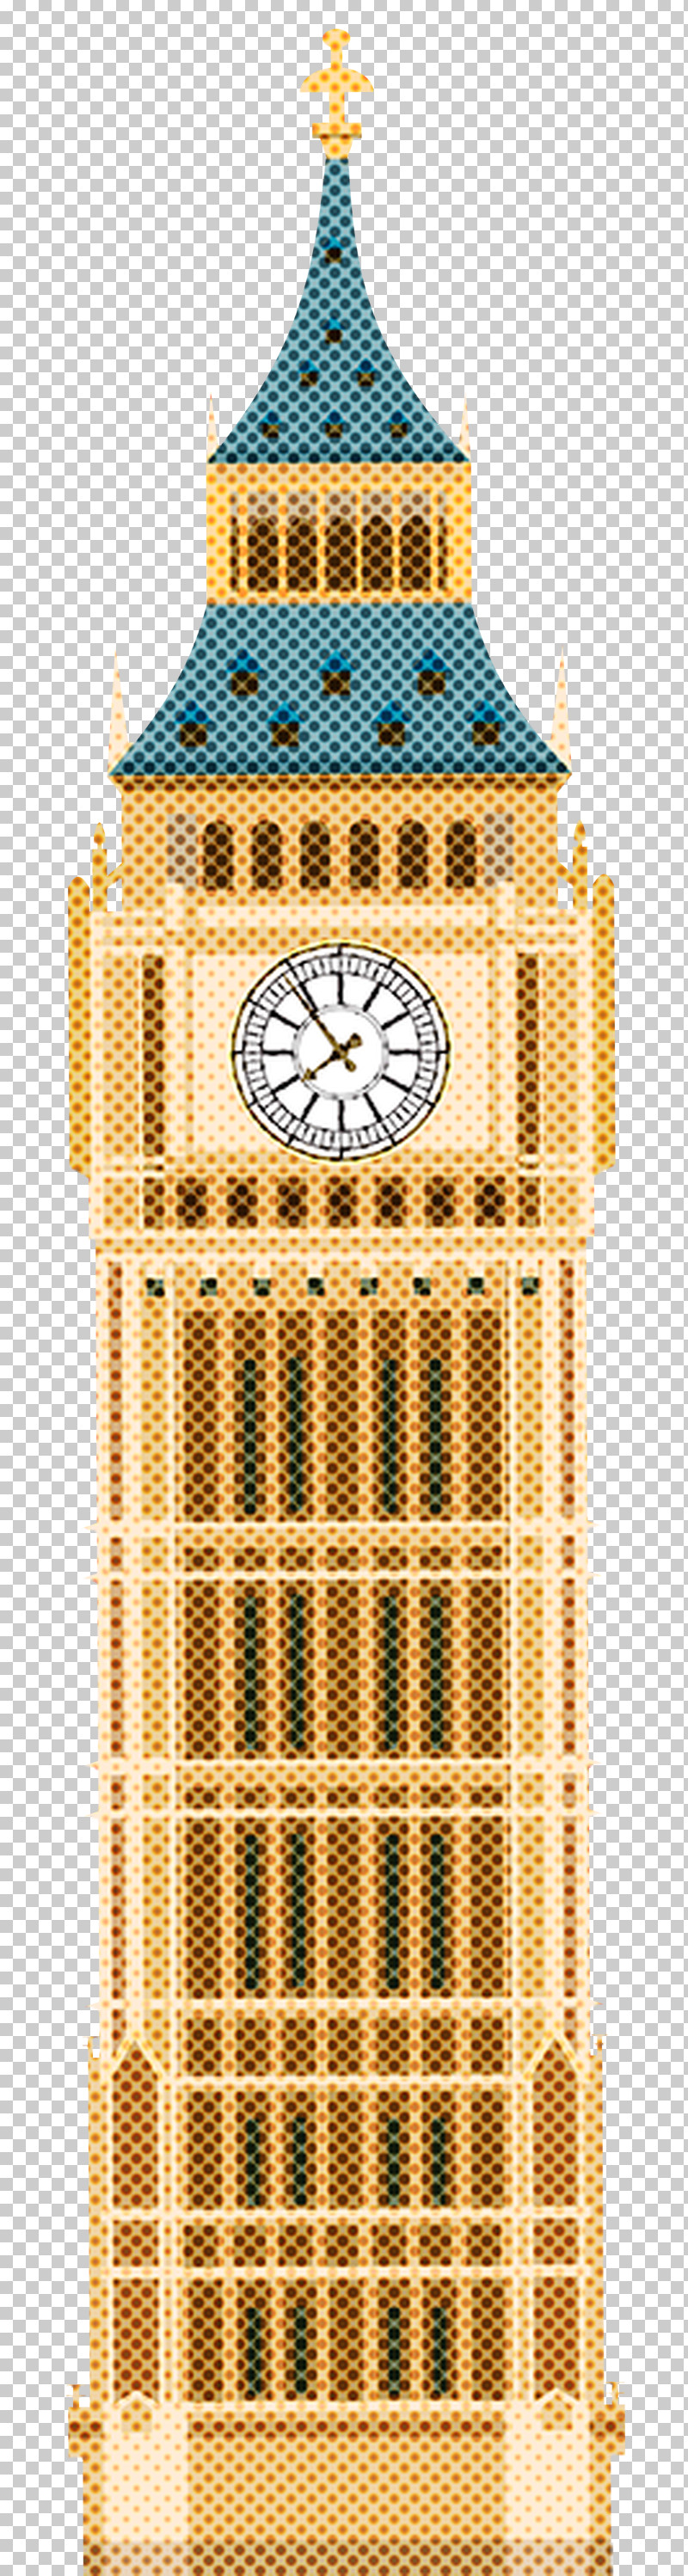 Clock Wall Clock Home Accessories Clock Tower PNG, Clipart, Clock, Clock Tower, Home Accessories, Wall Clock Free PNG Download